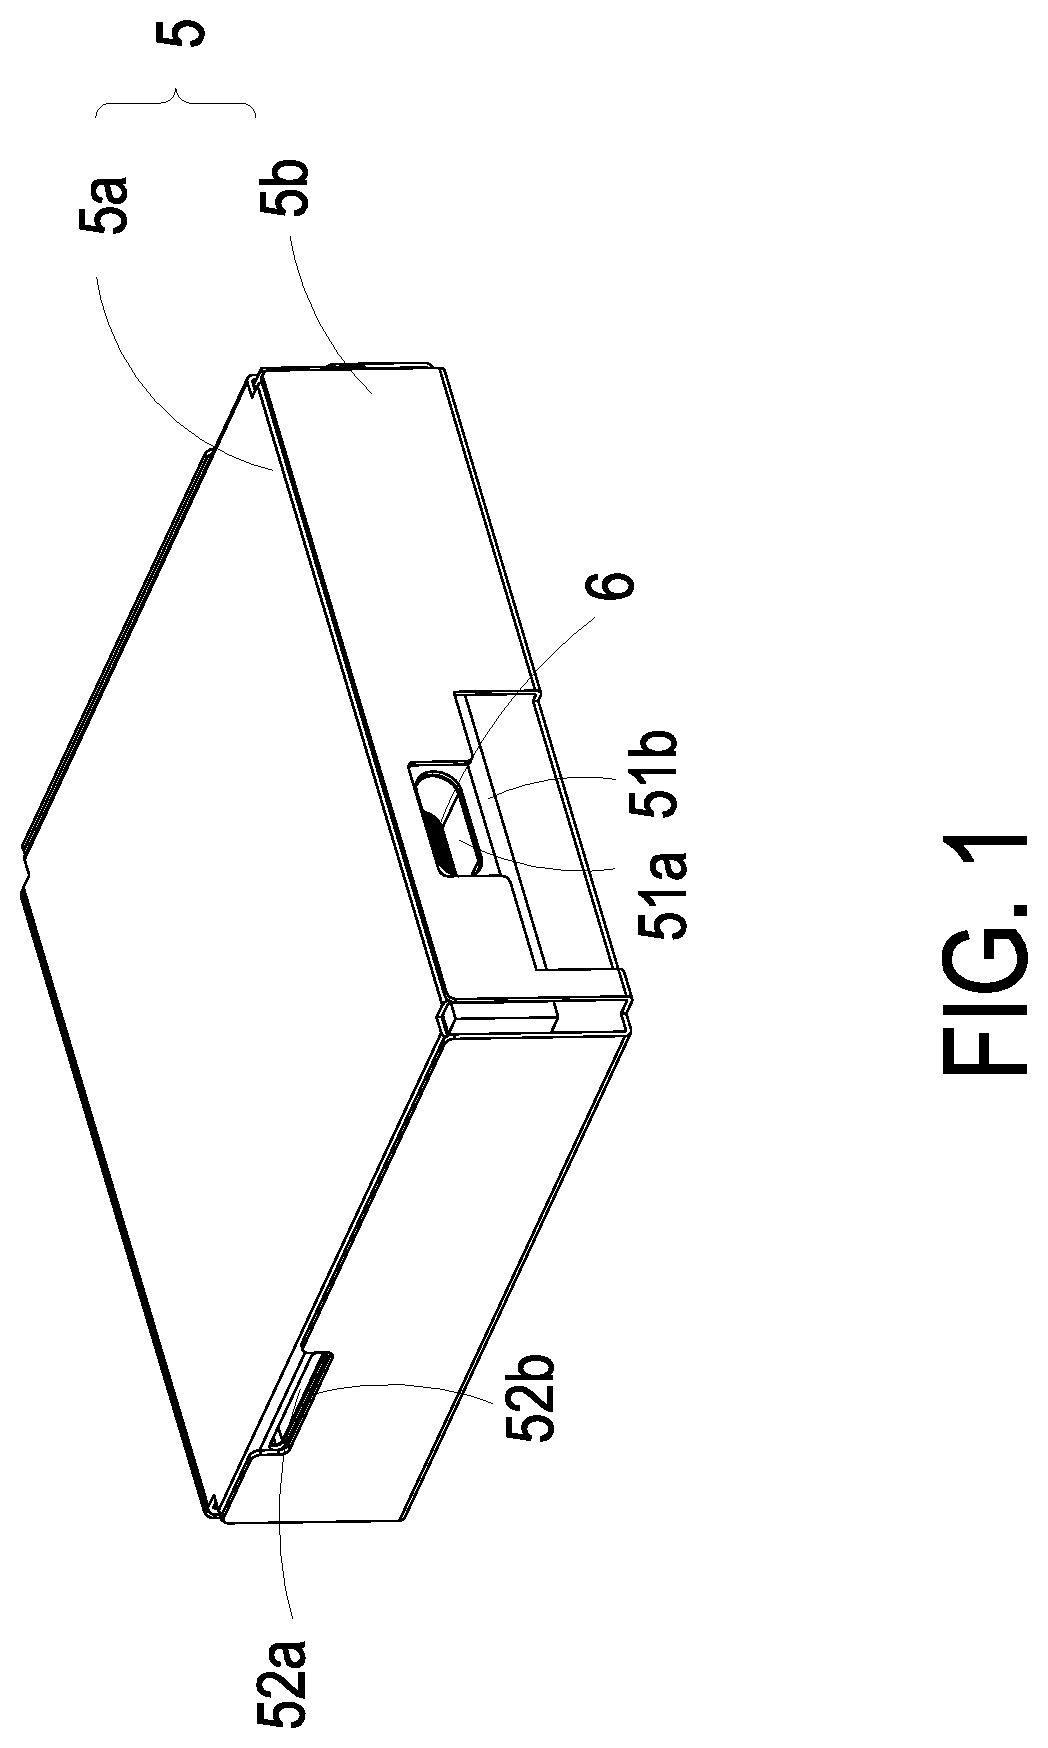 Particle detecting device